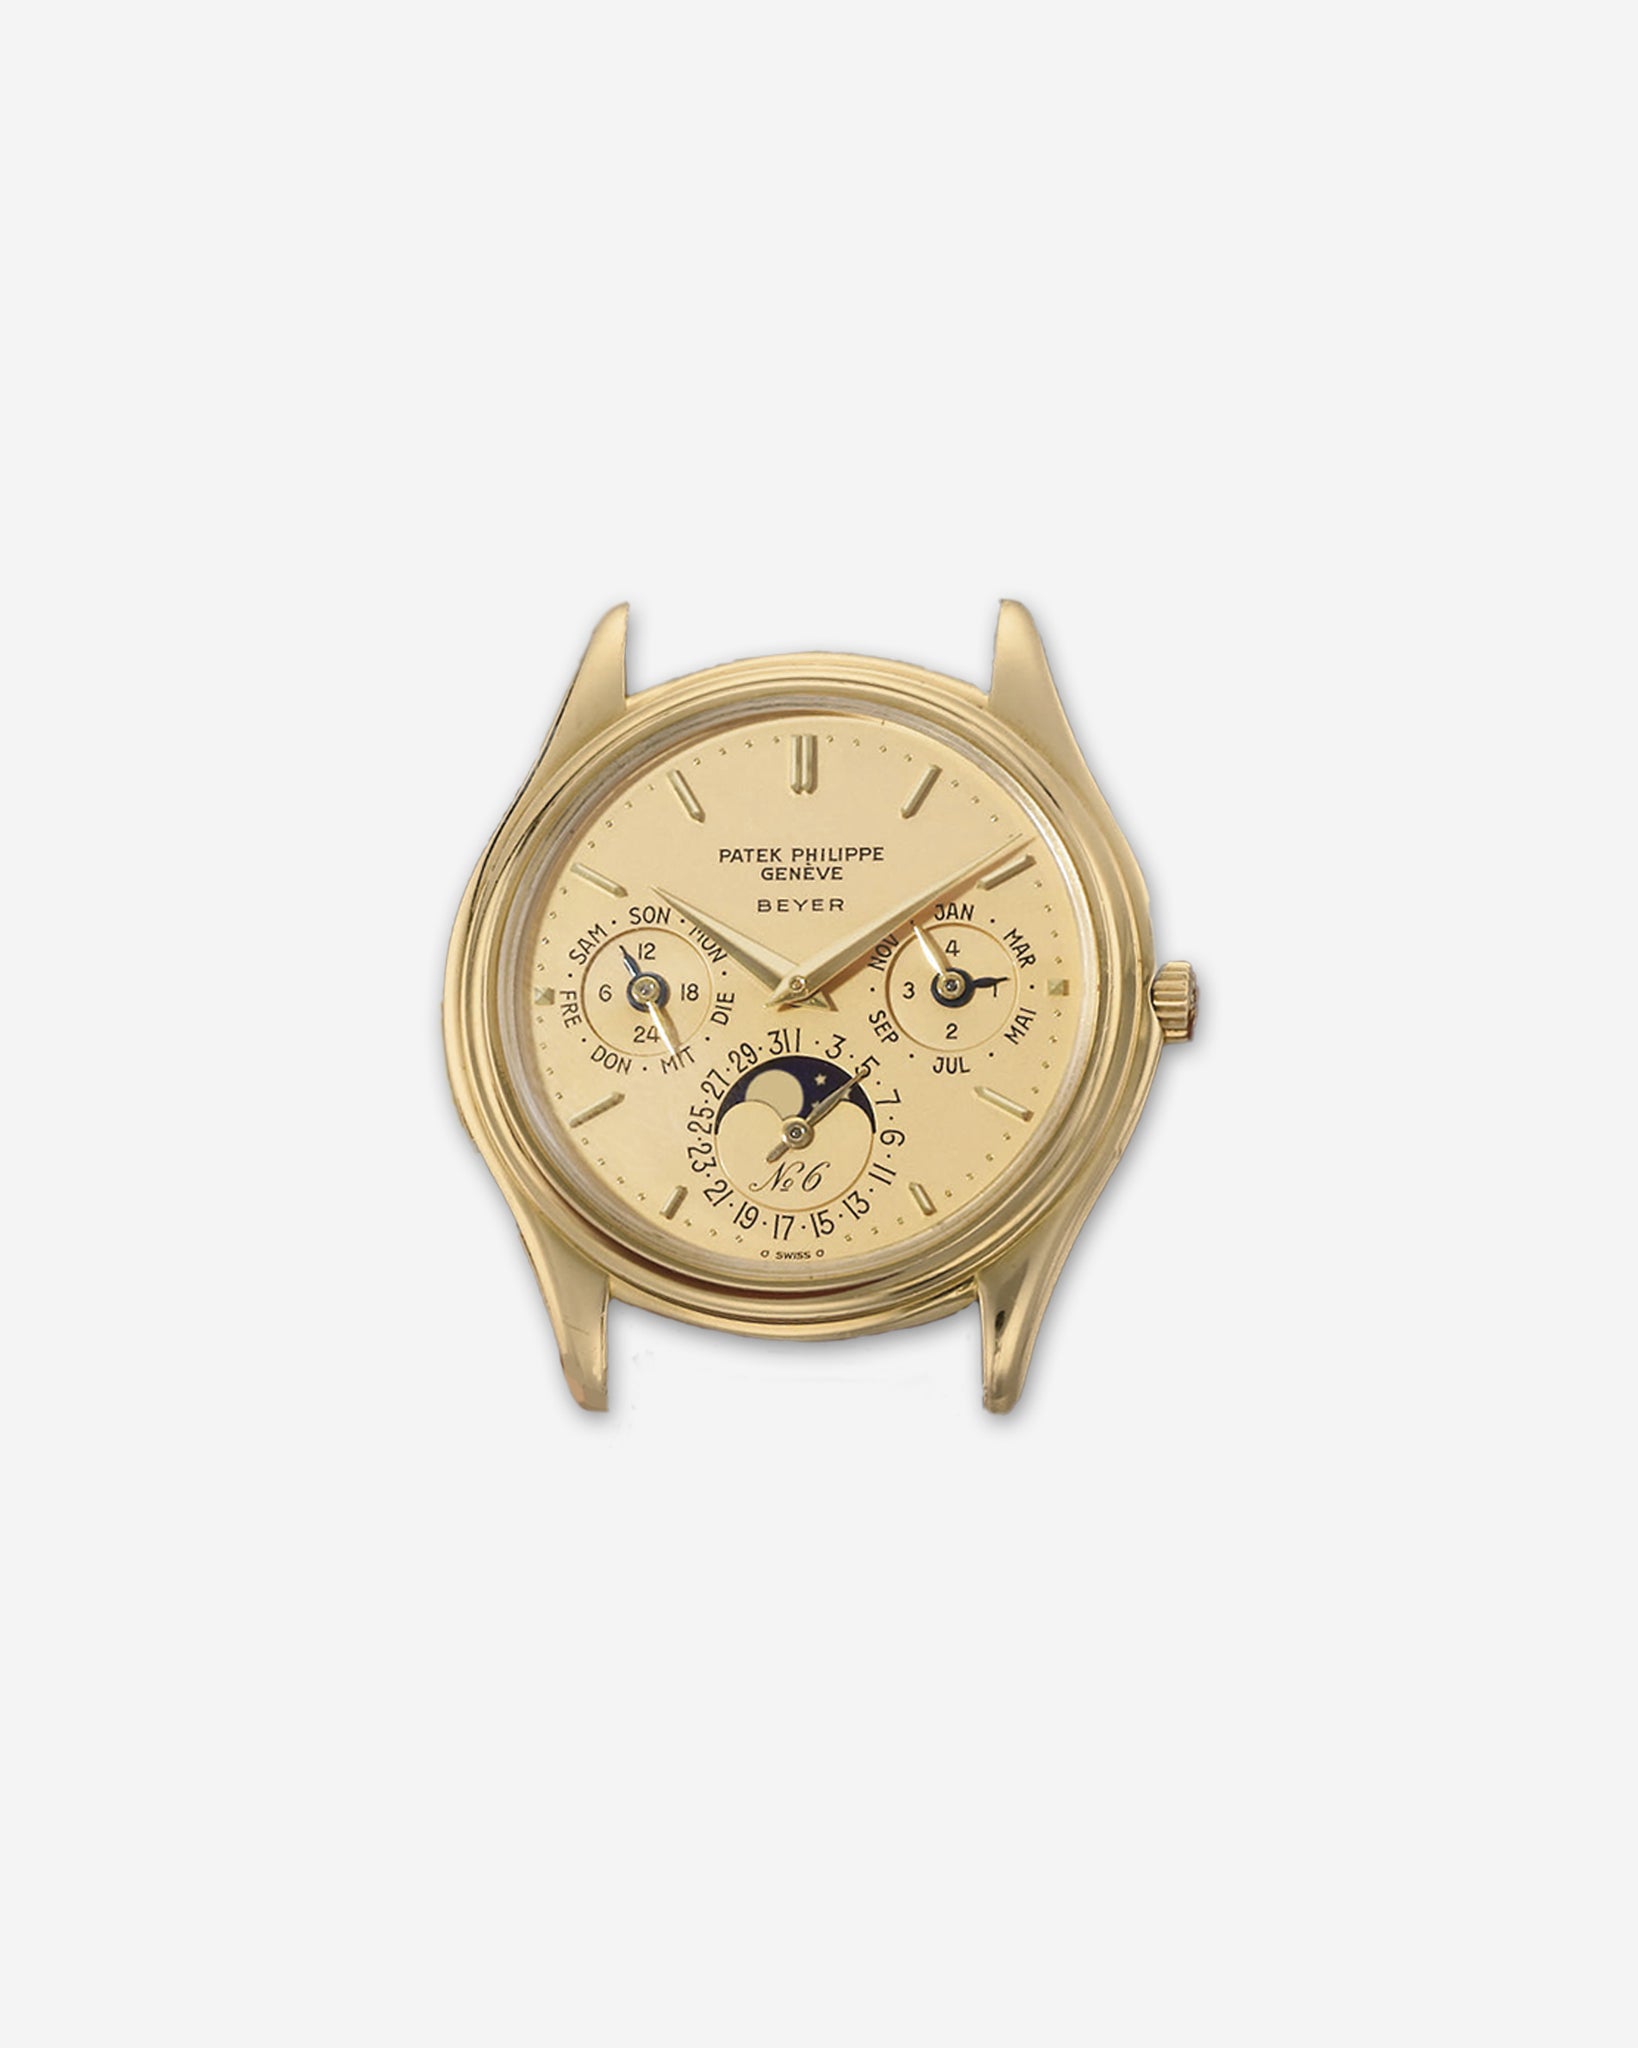 Patek Philippe Beyer signed 3940 yellow gold with gold dial